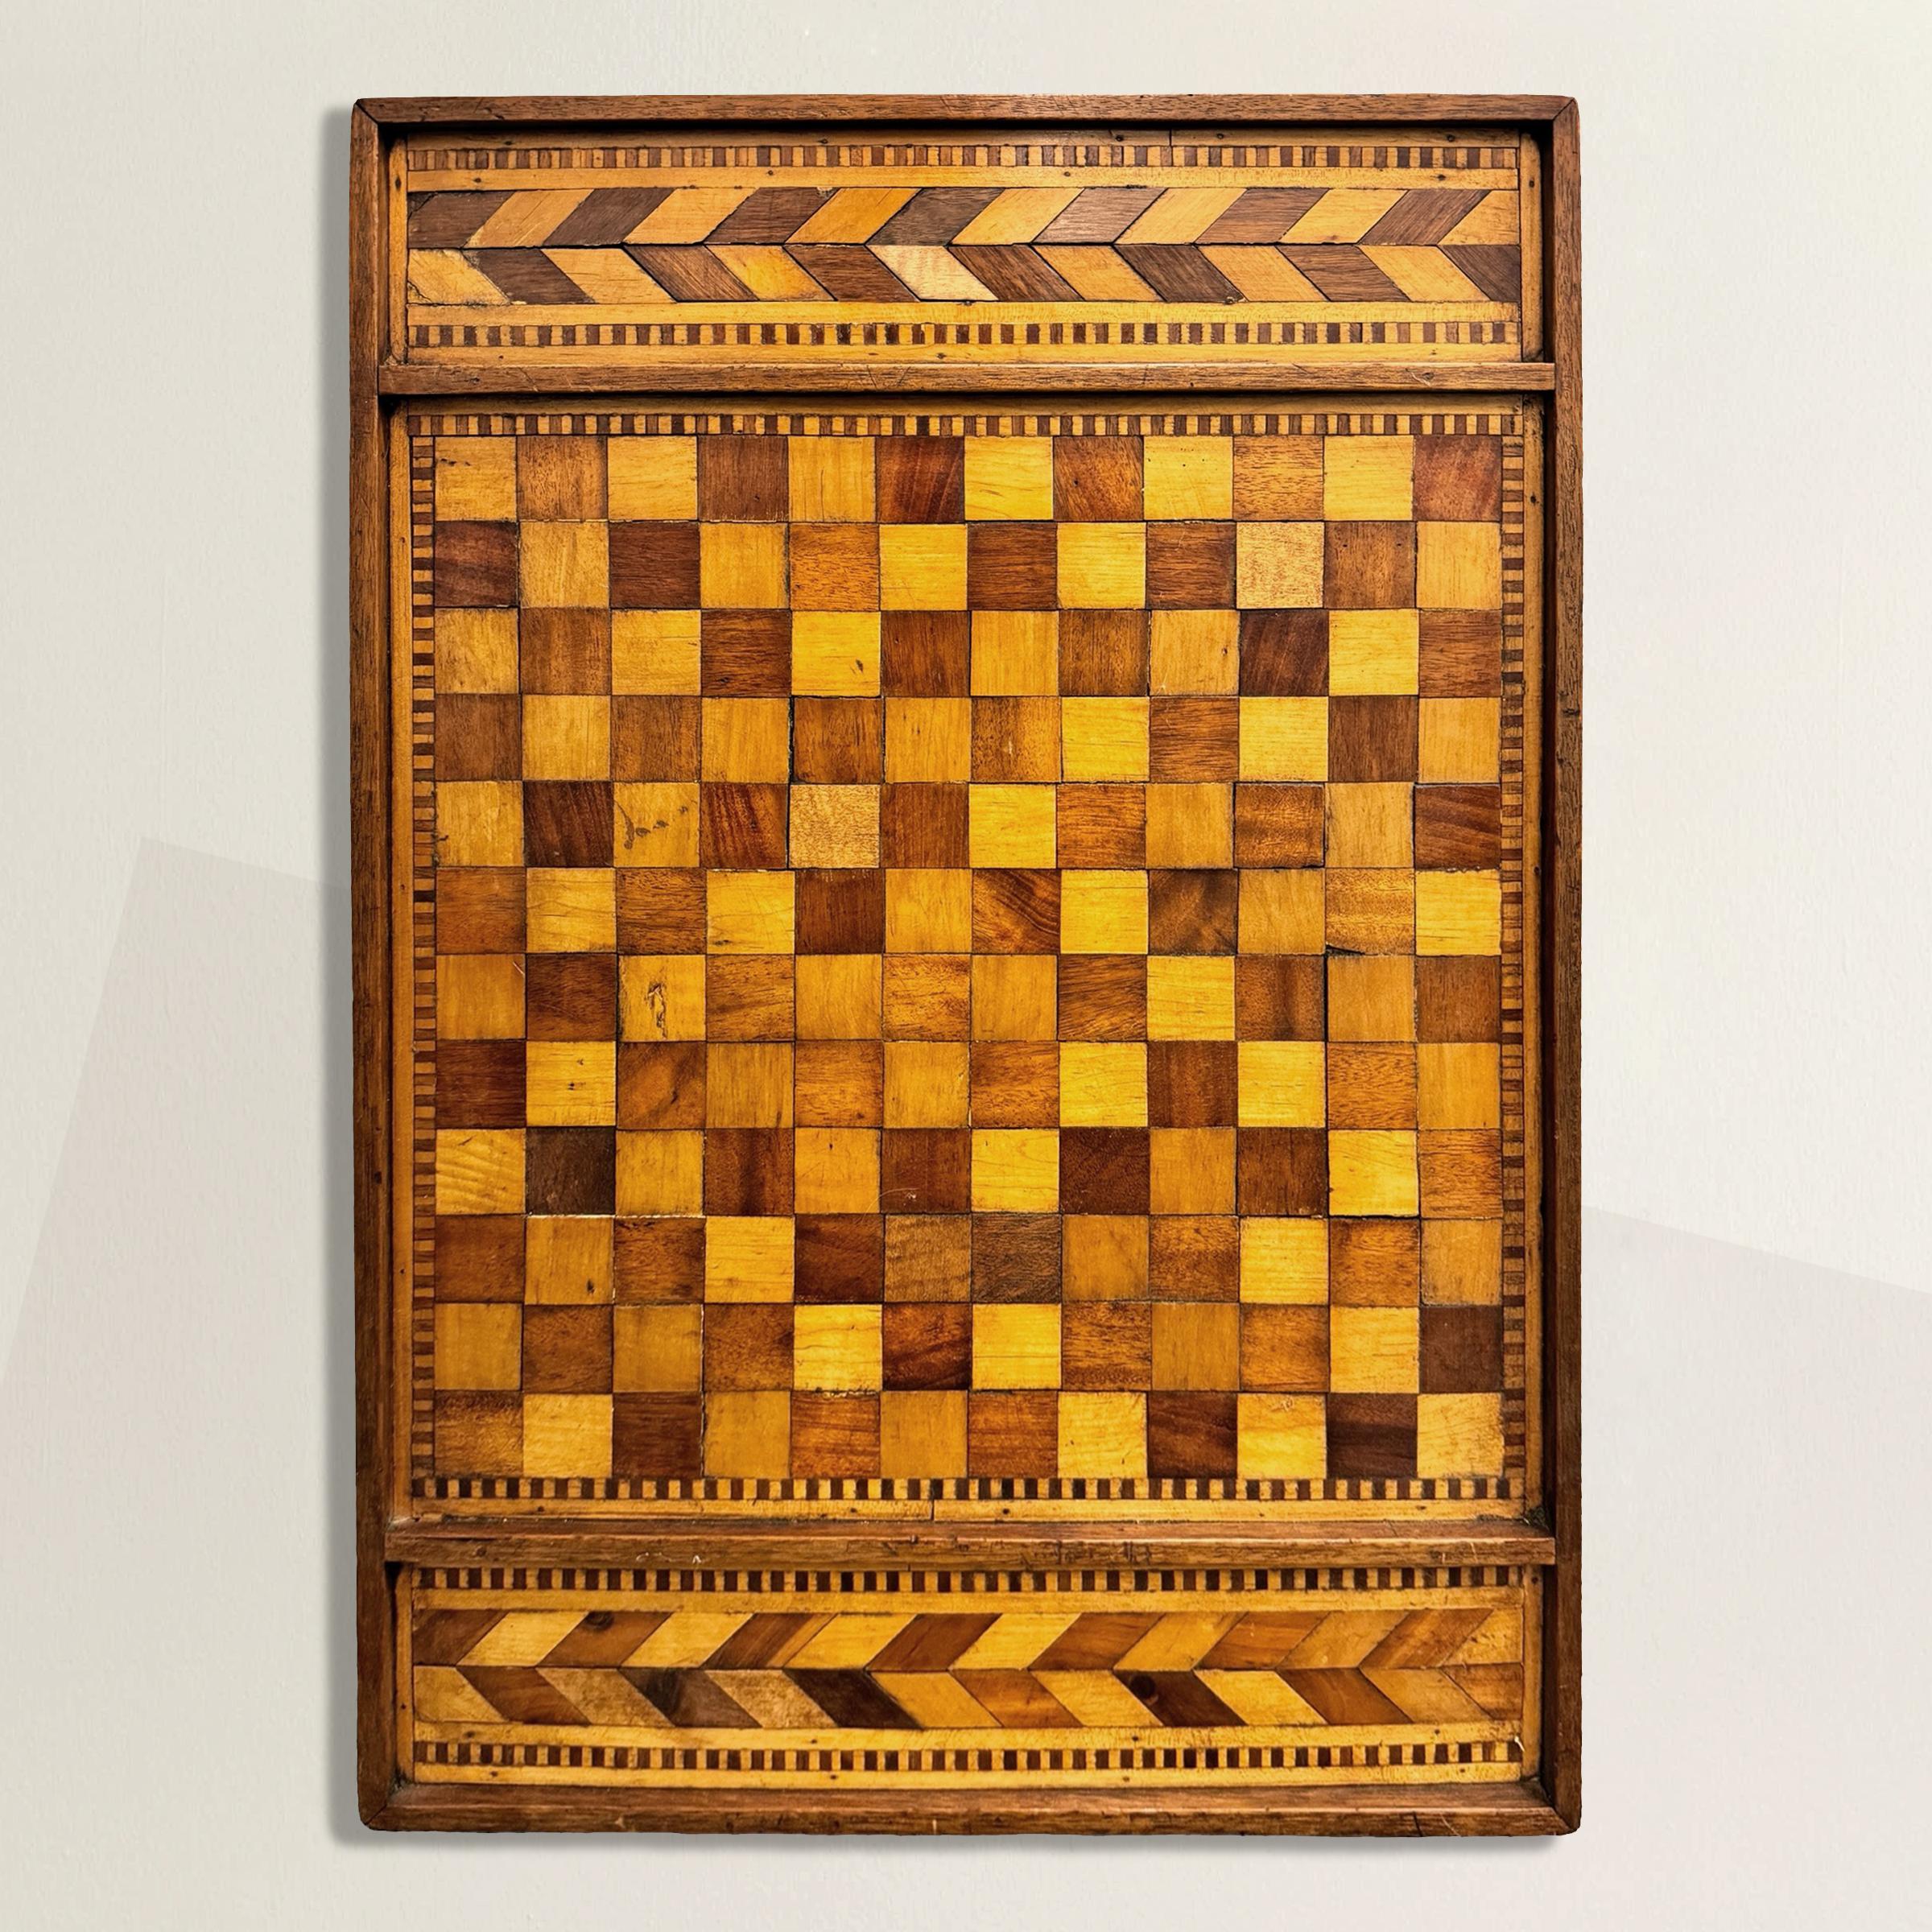 This 19th-century American folk art game board is a quintessential example of the ingenuity and aesthetic appeal found in traditional American crafts. Composed of alternating walnut and maple squares in a 12 by 12 pattern, this board showcases the